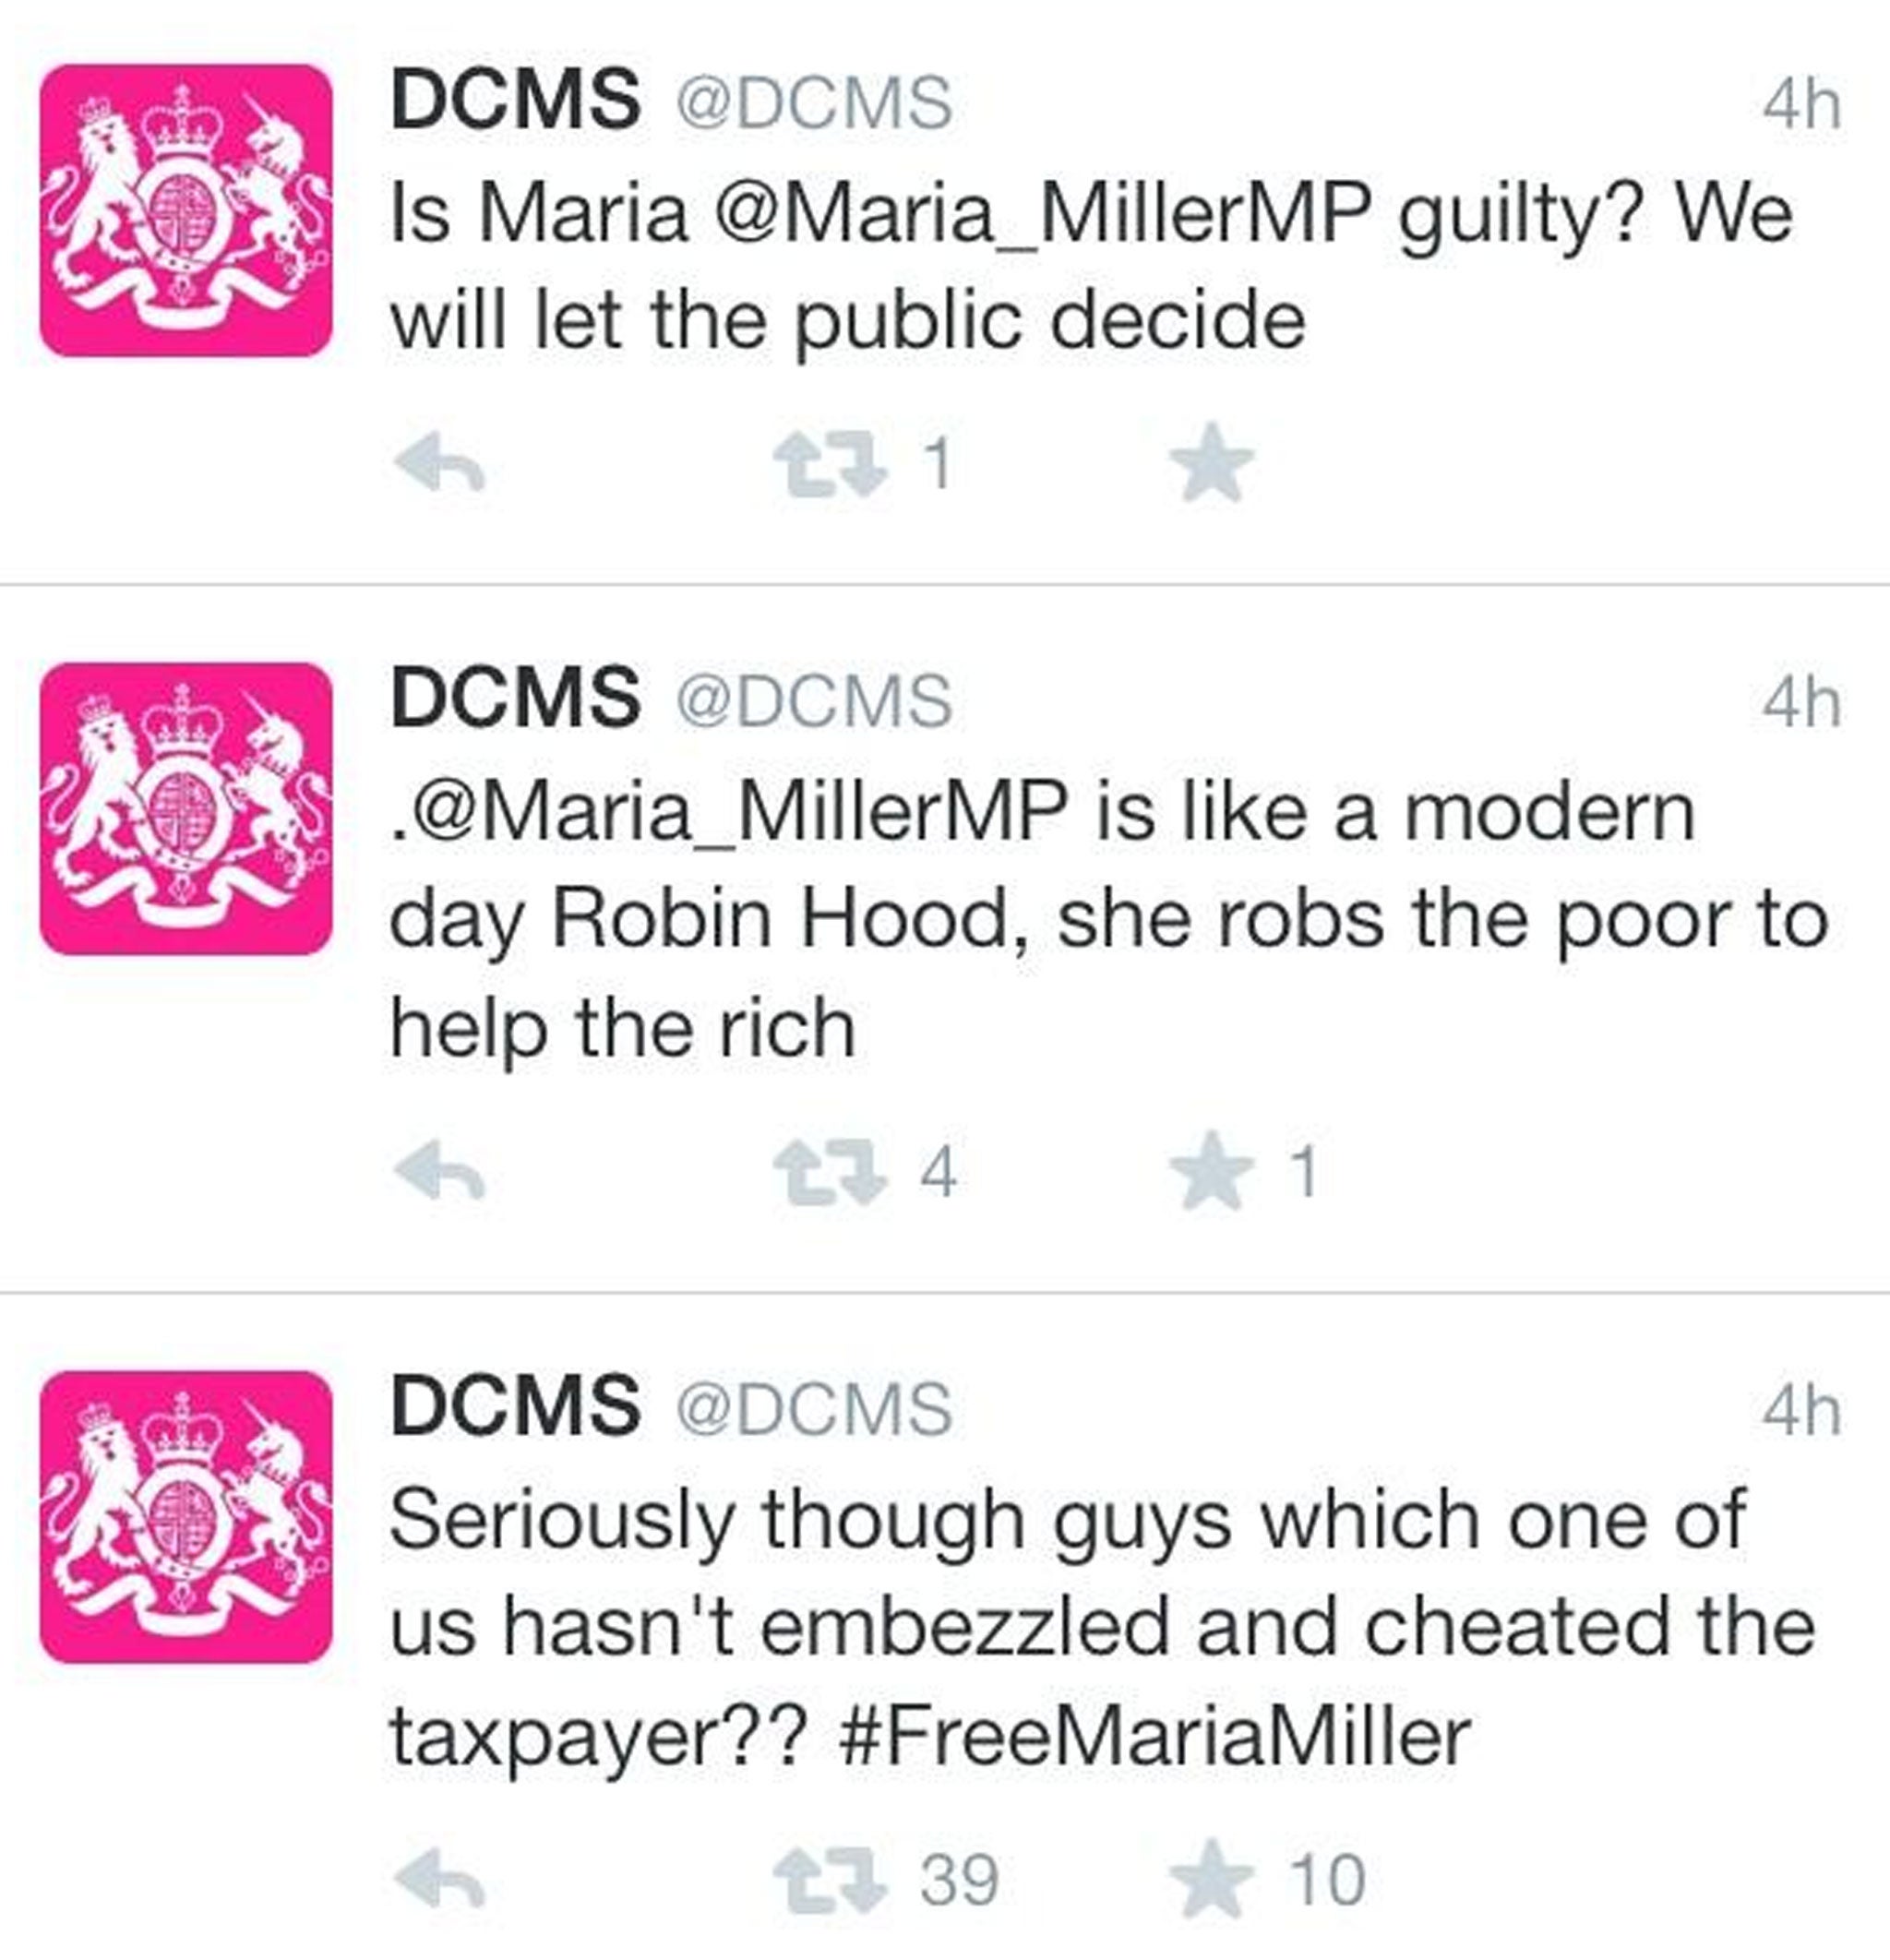 The series of tweets posted from the DCMS account on Saturday evening